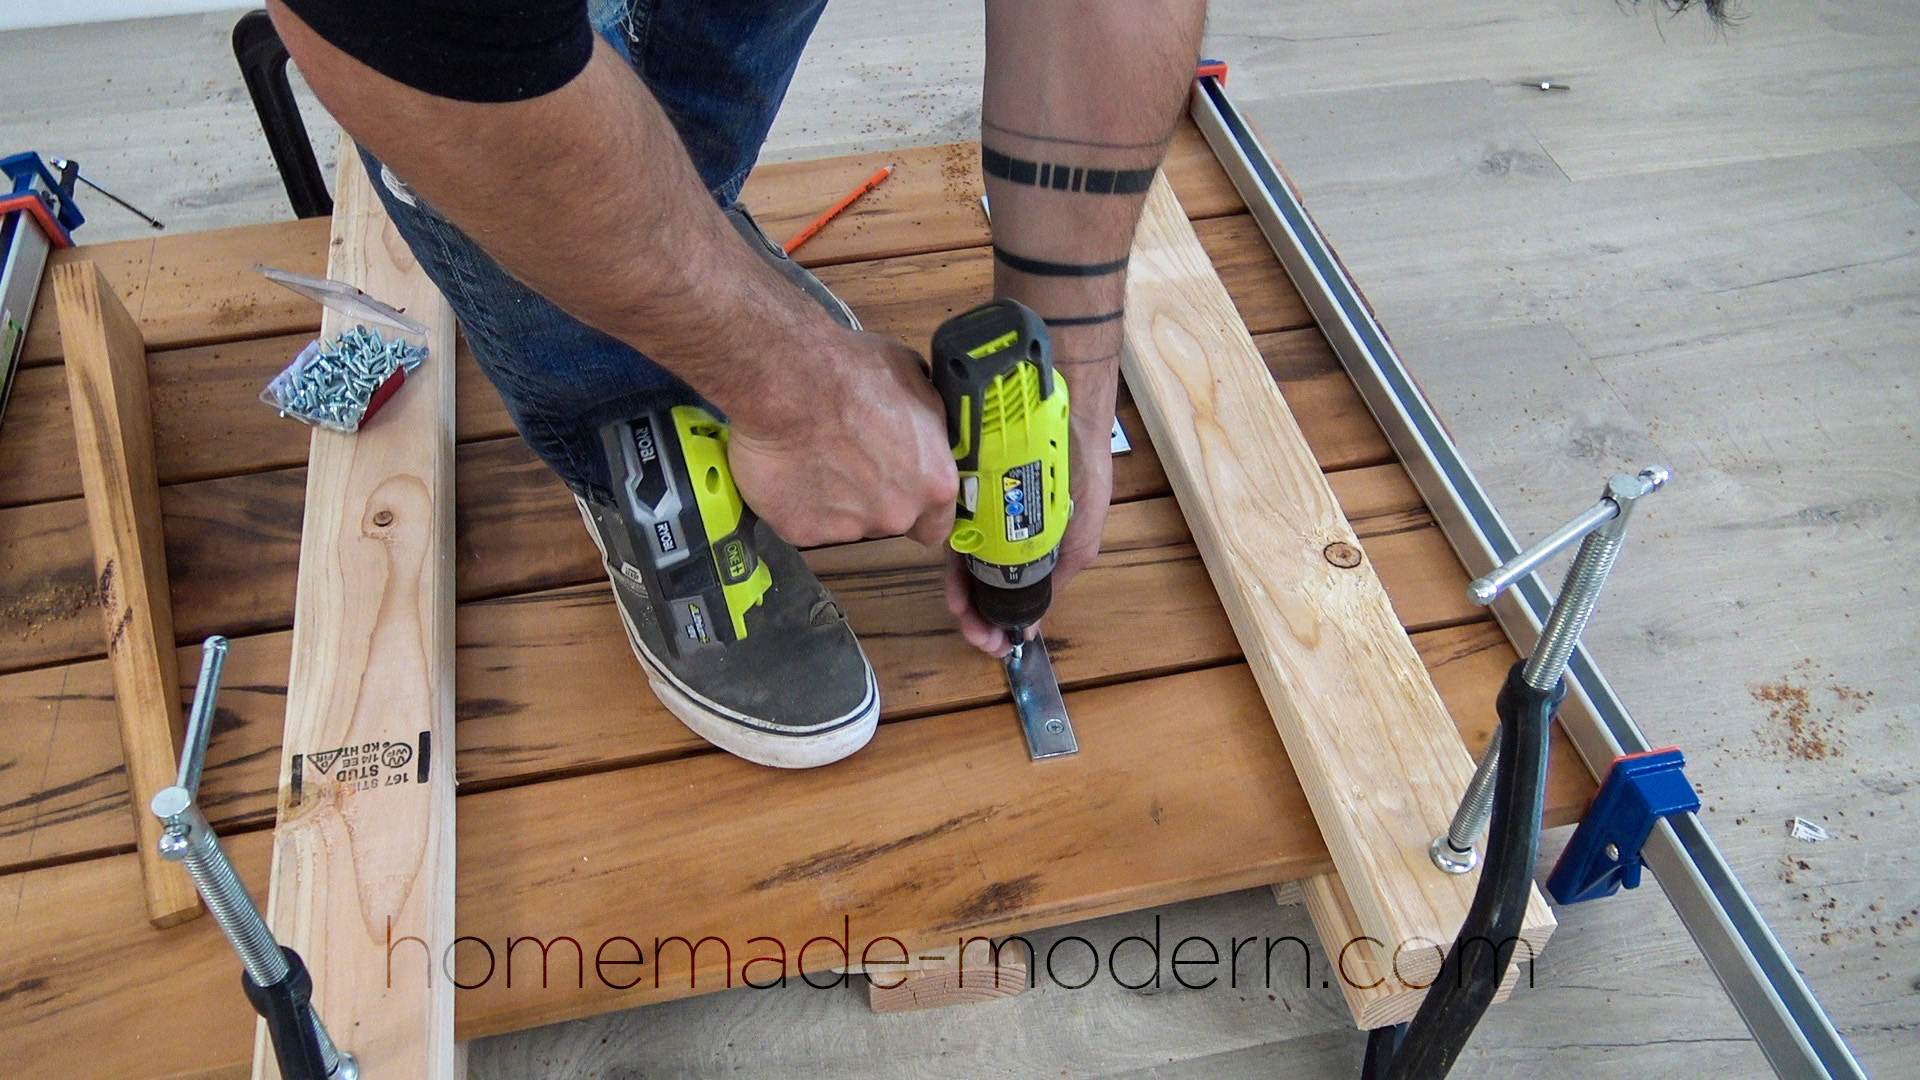 This DIY outdoor tigerwood dining table can be made using just three power tools. For more information go to HomeMade-Modern.com